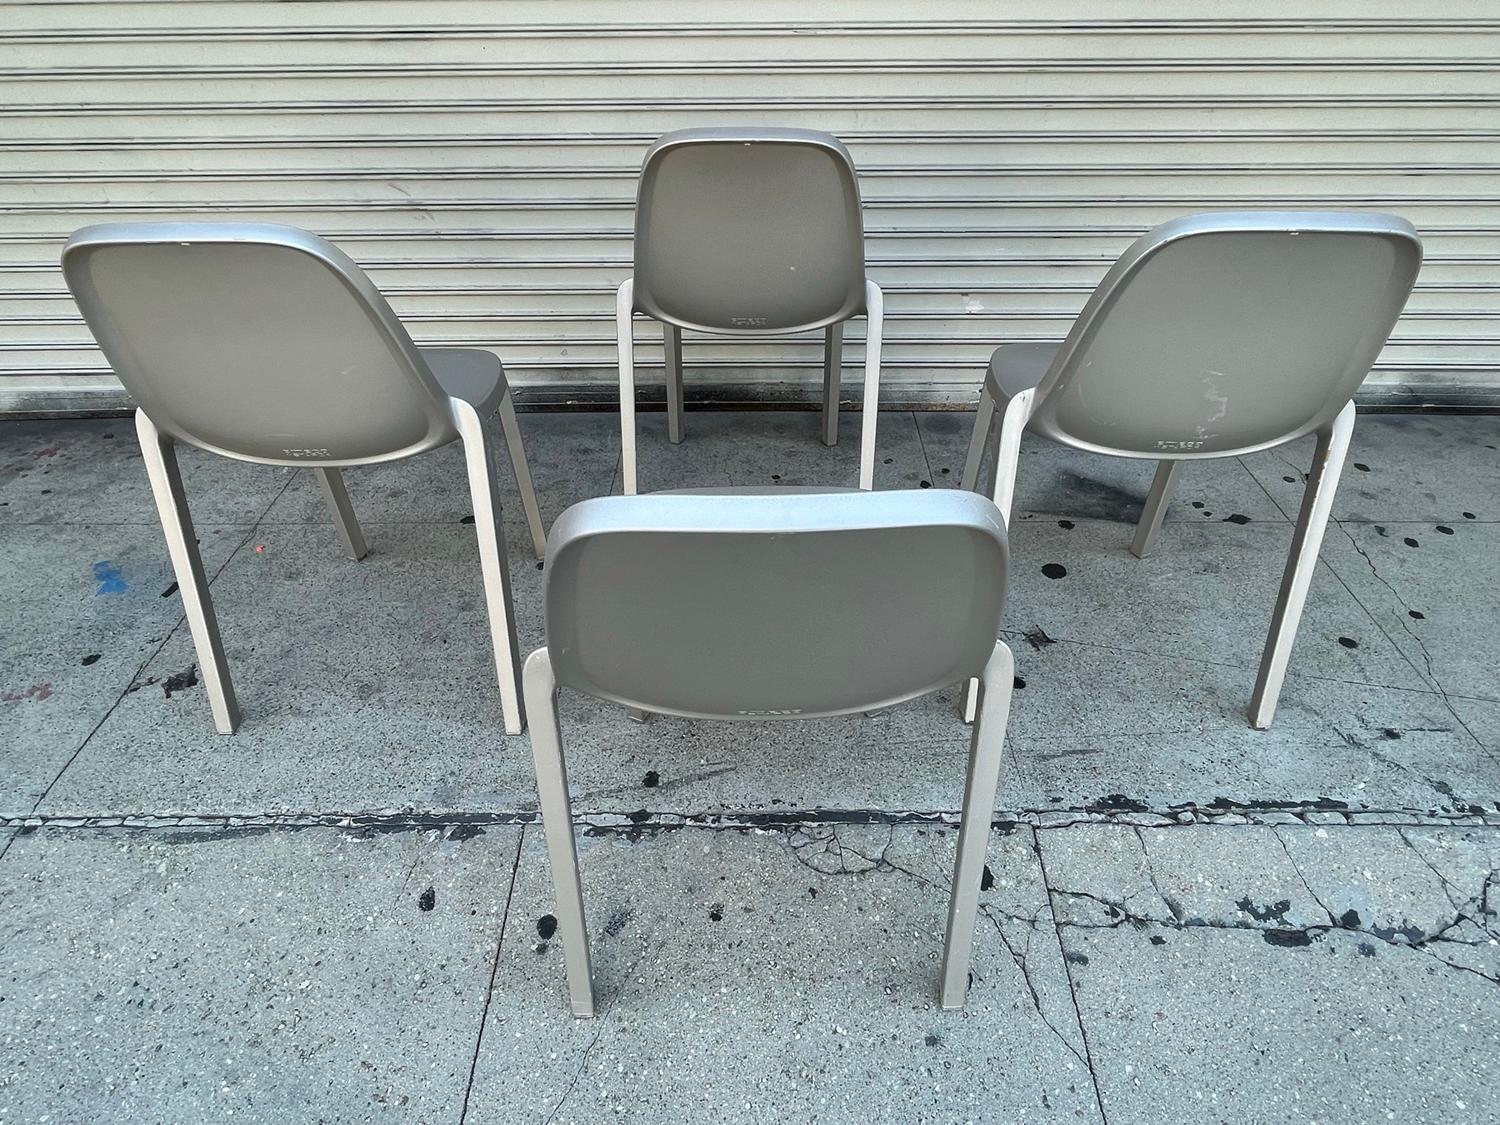 Set of 4 Broom Chairs by Philippe Starck for Emeco 1